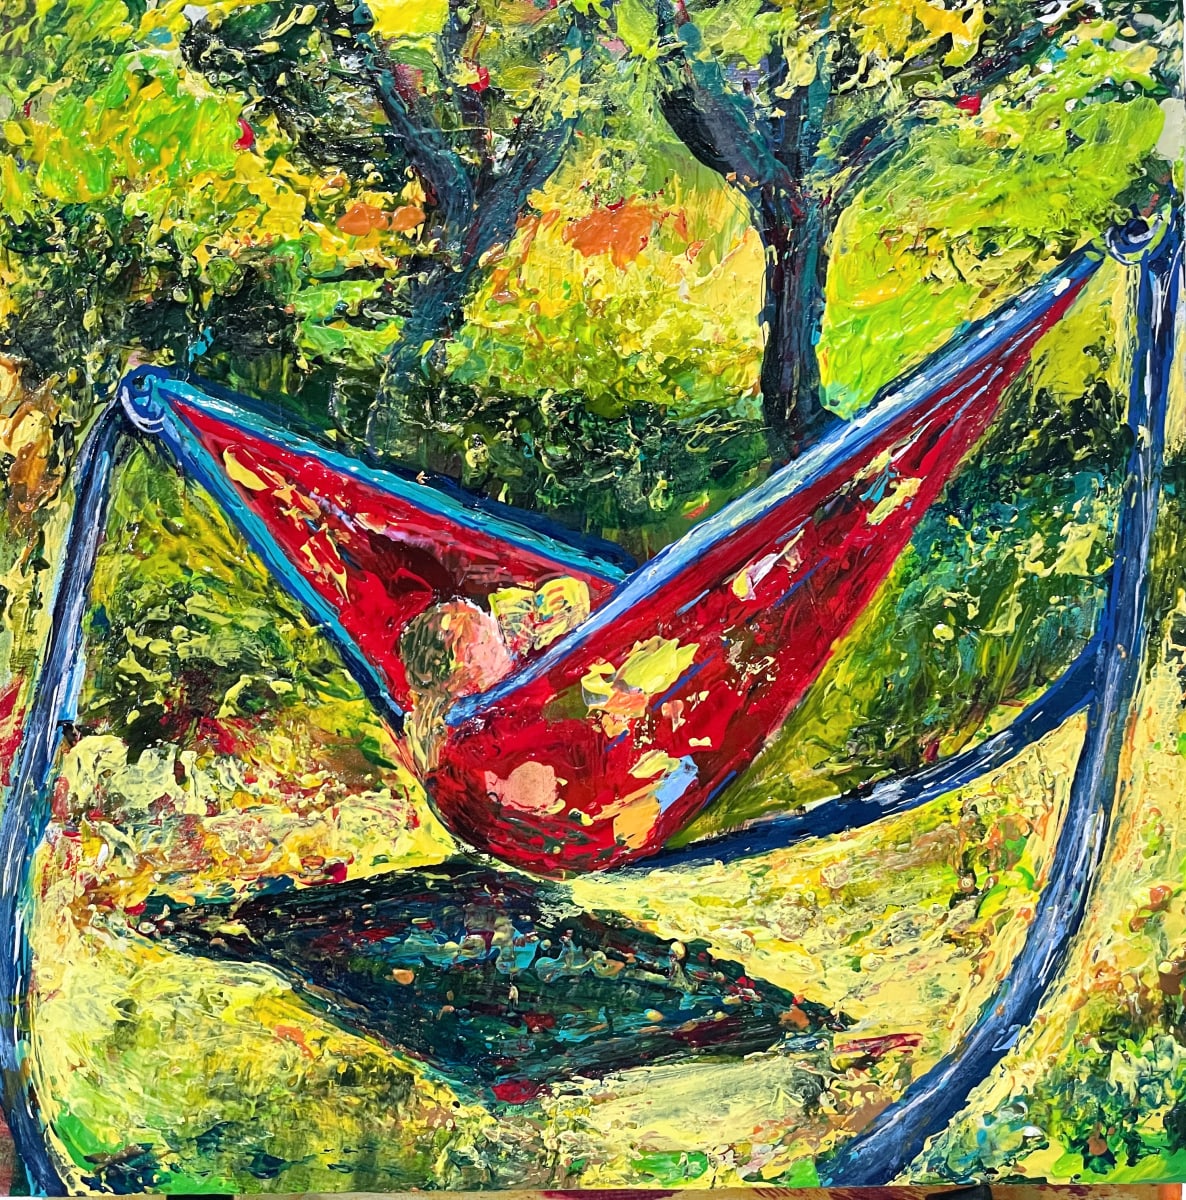 Hahn Horticulture Garden_ Hammock by Teri H. Hoover  Image: TH22Au_19a